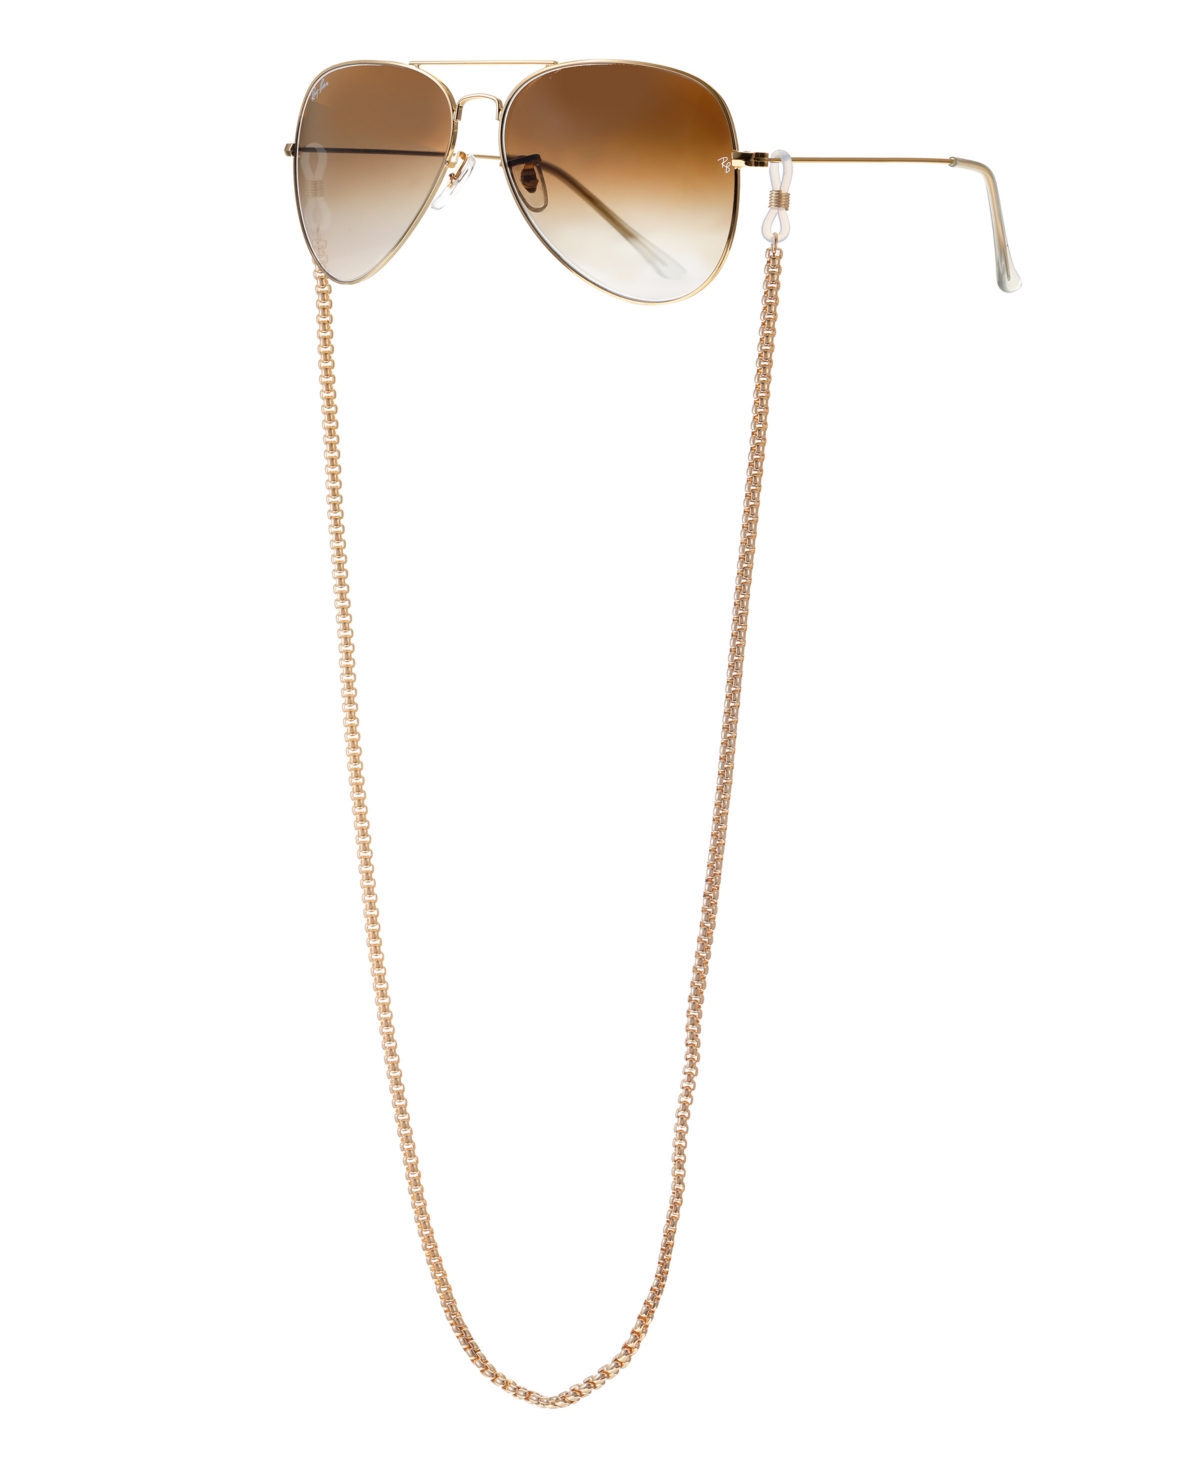 Women's 18k Gold Plated Linked Up Glasses Chain - Gold-Plated